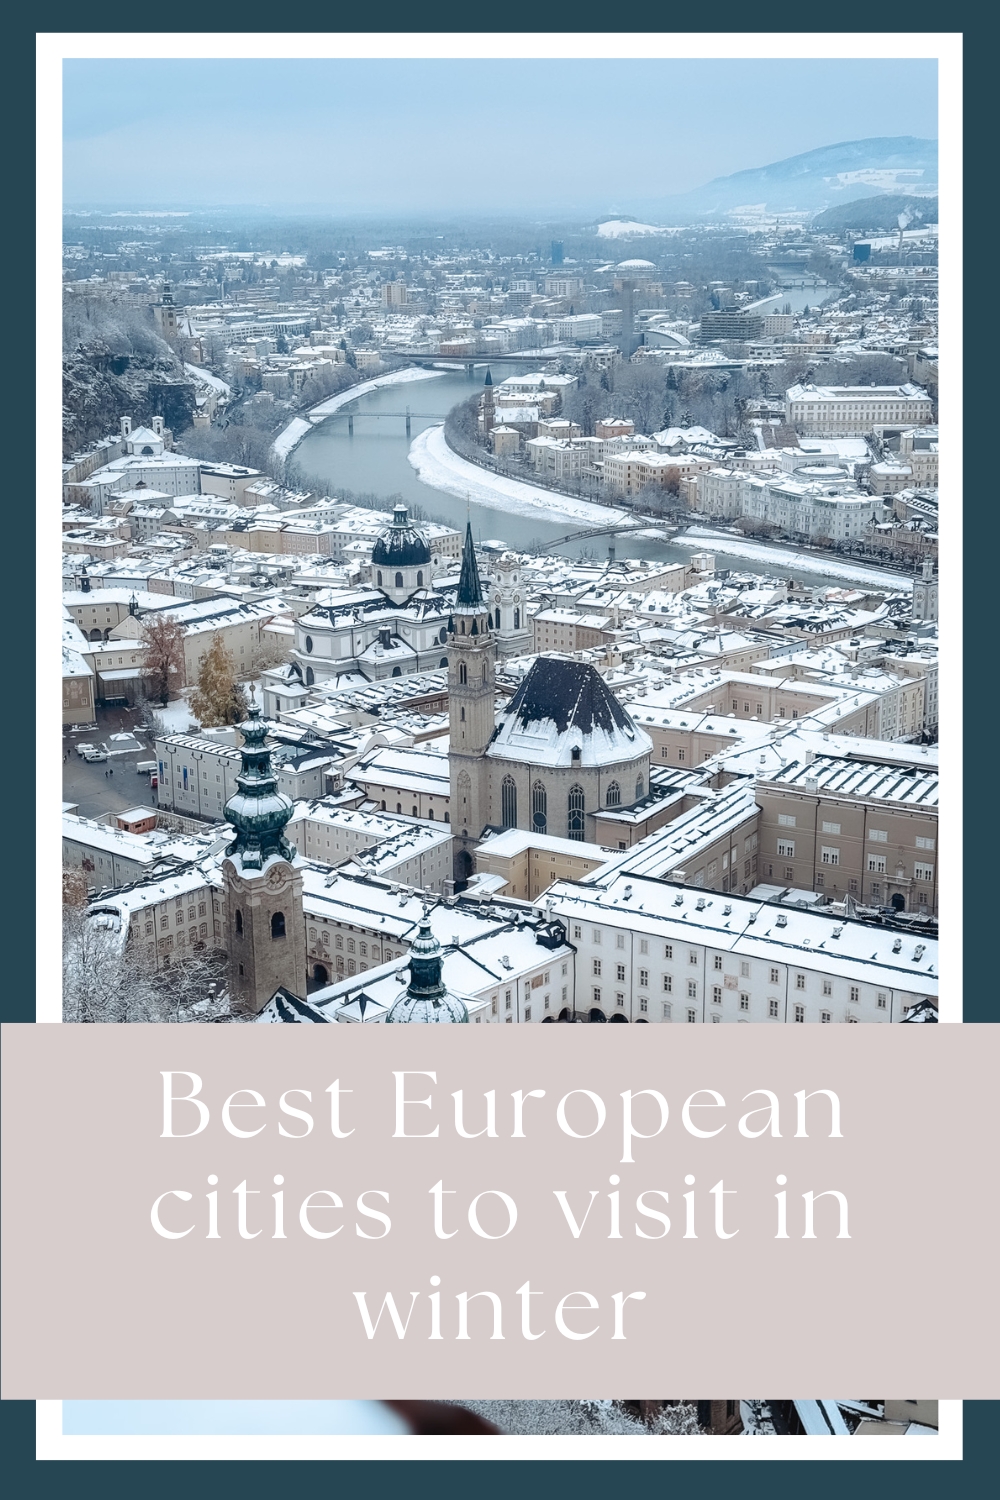 Best European cities to visit in winter by My Next Pin